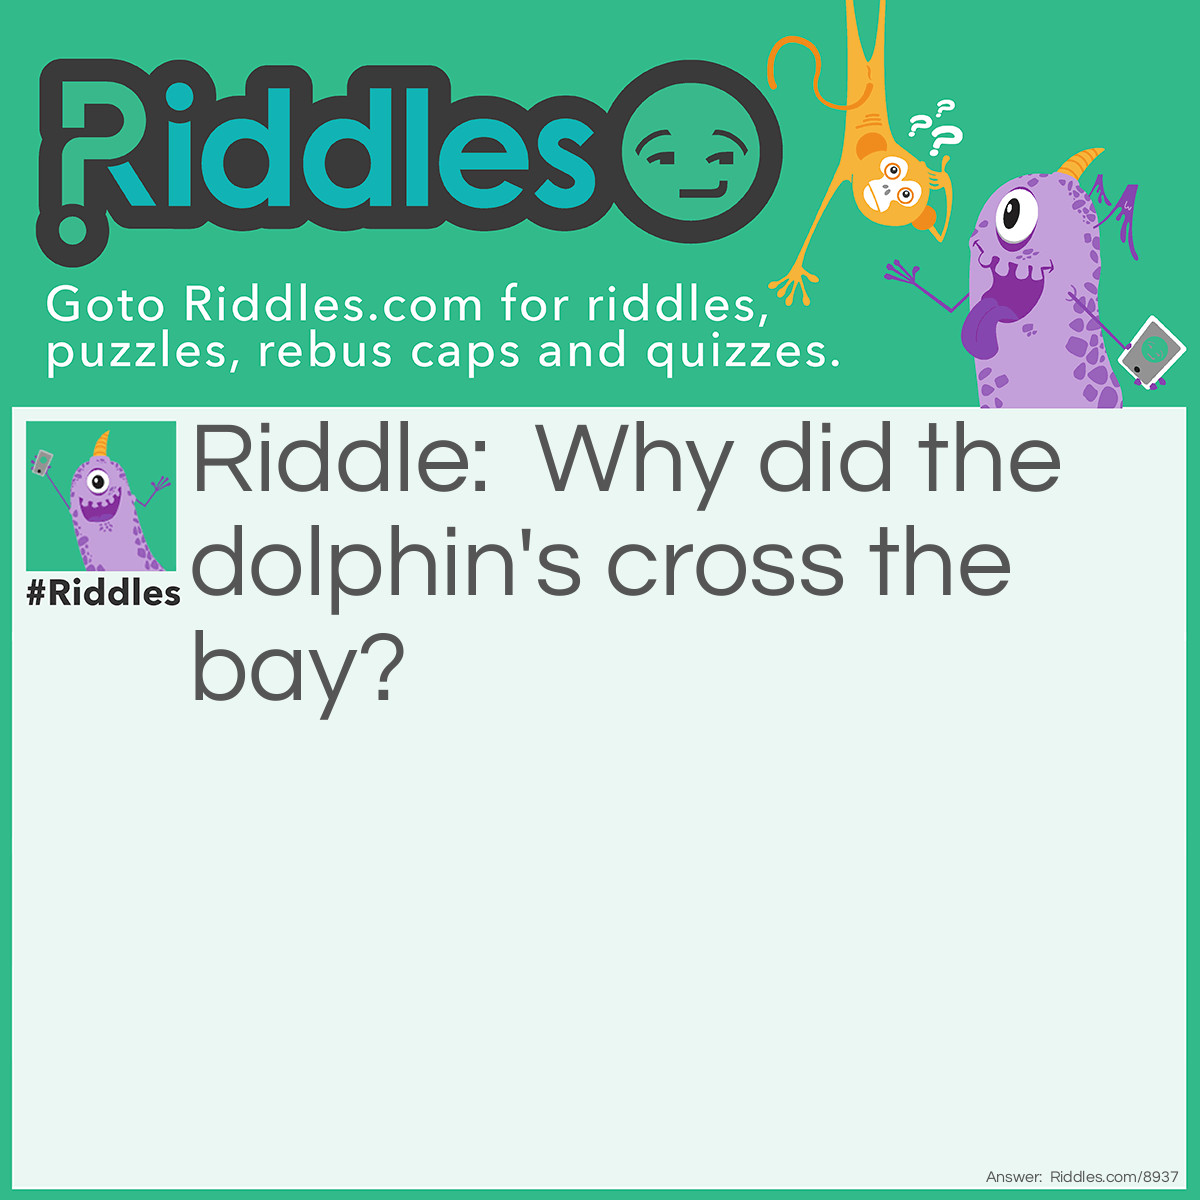 Riddle: Why did the dolphin's cross the bay? Answer: So they could reach the other tide.